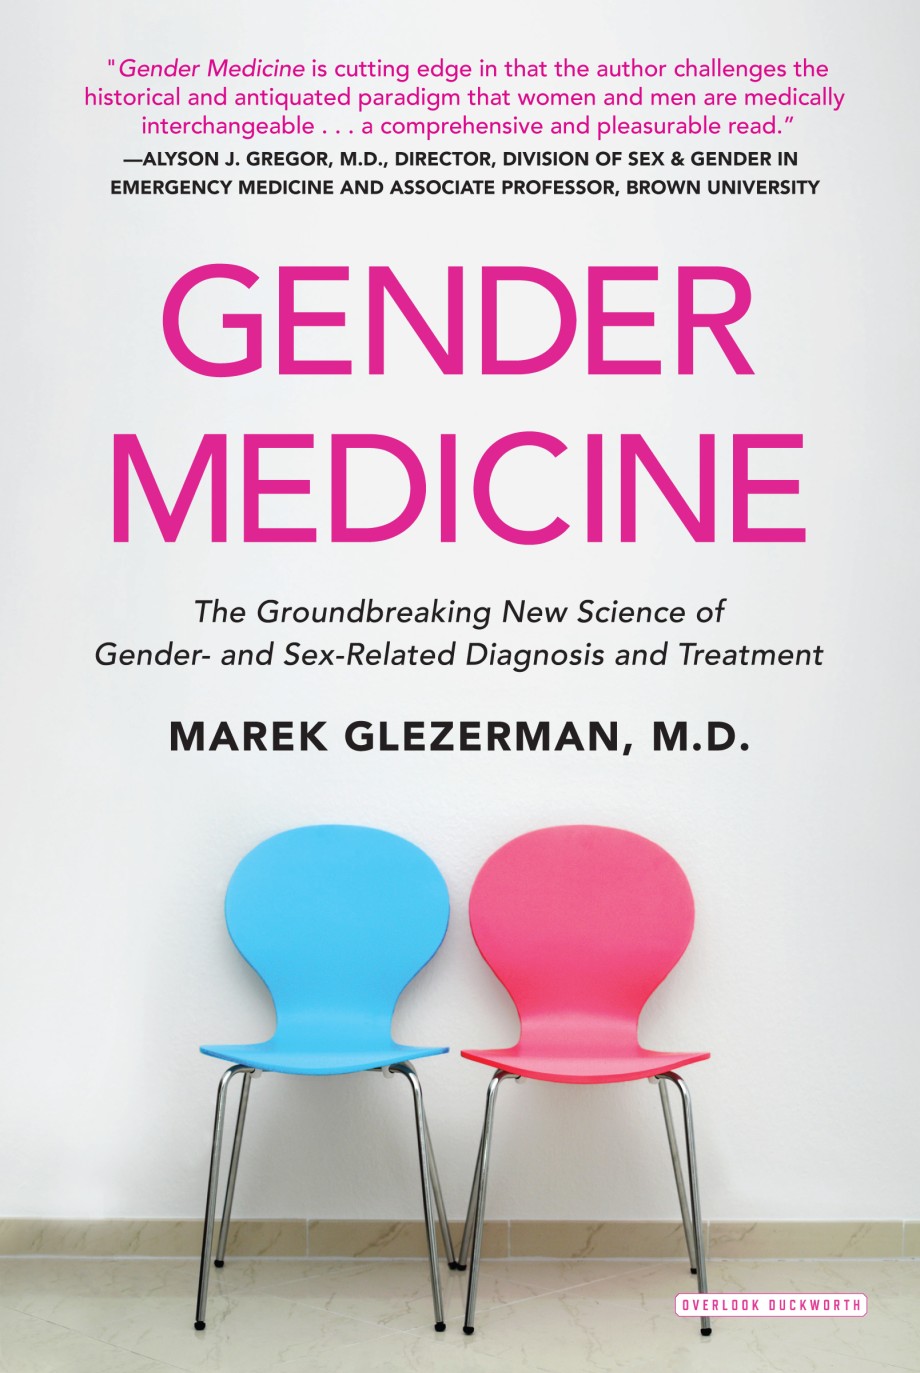 Gender Medicine The Groundbreaking New Science of Gender- and Sex-Related Diagnosis and Treatment